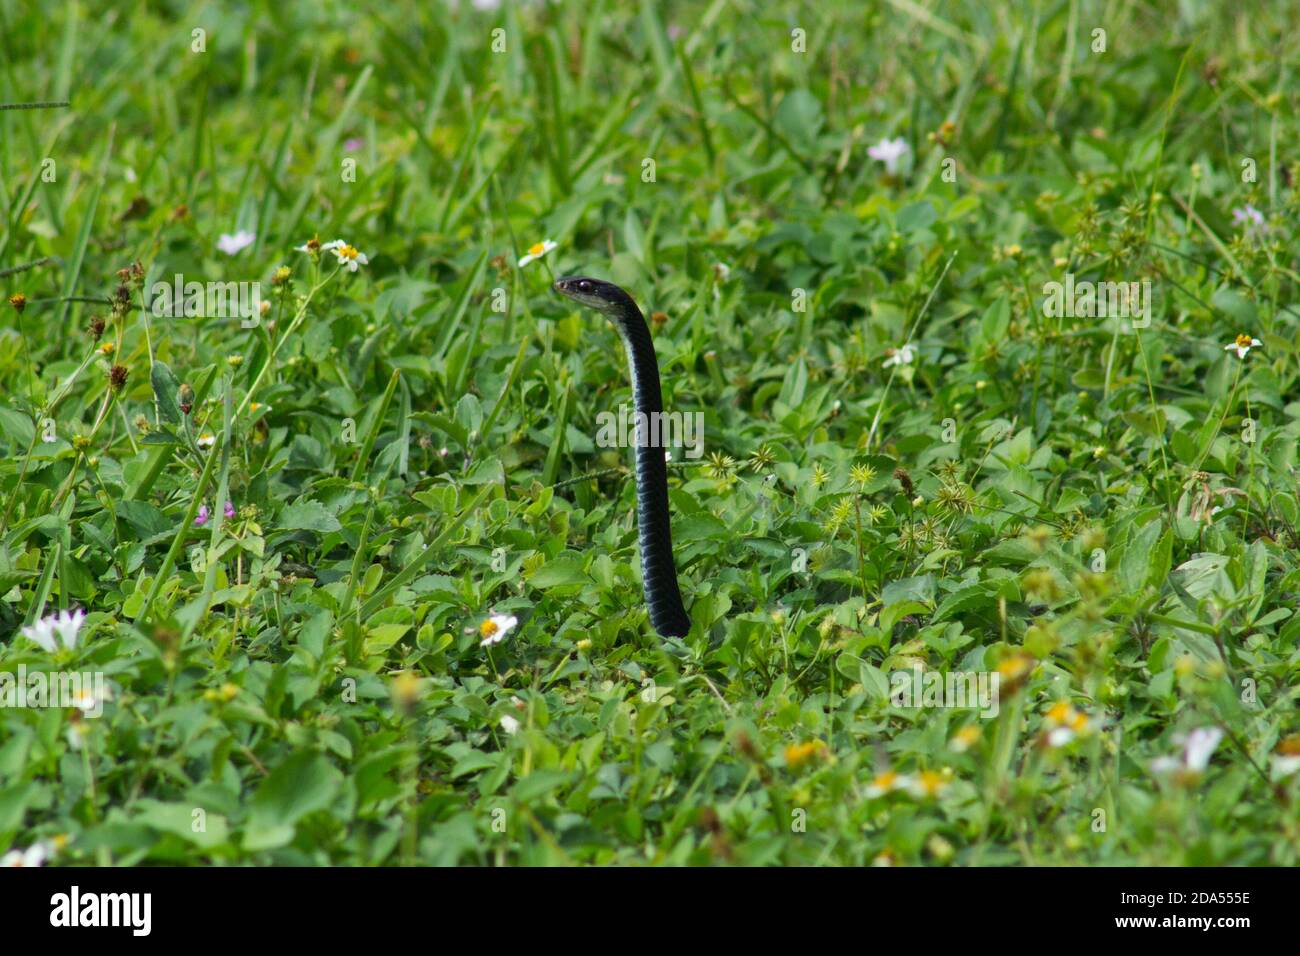 A black snake pops its head out of the grass Stock Photo